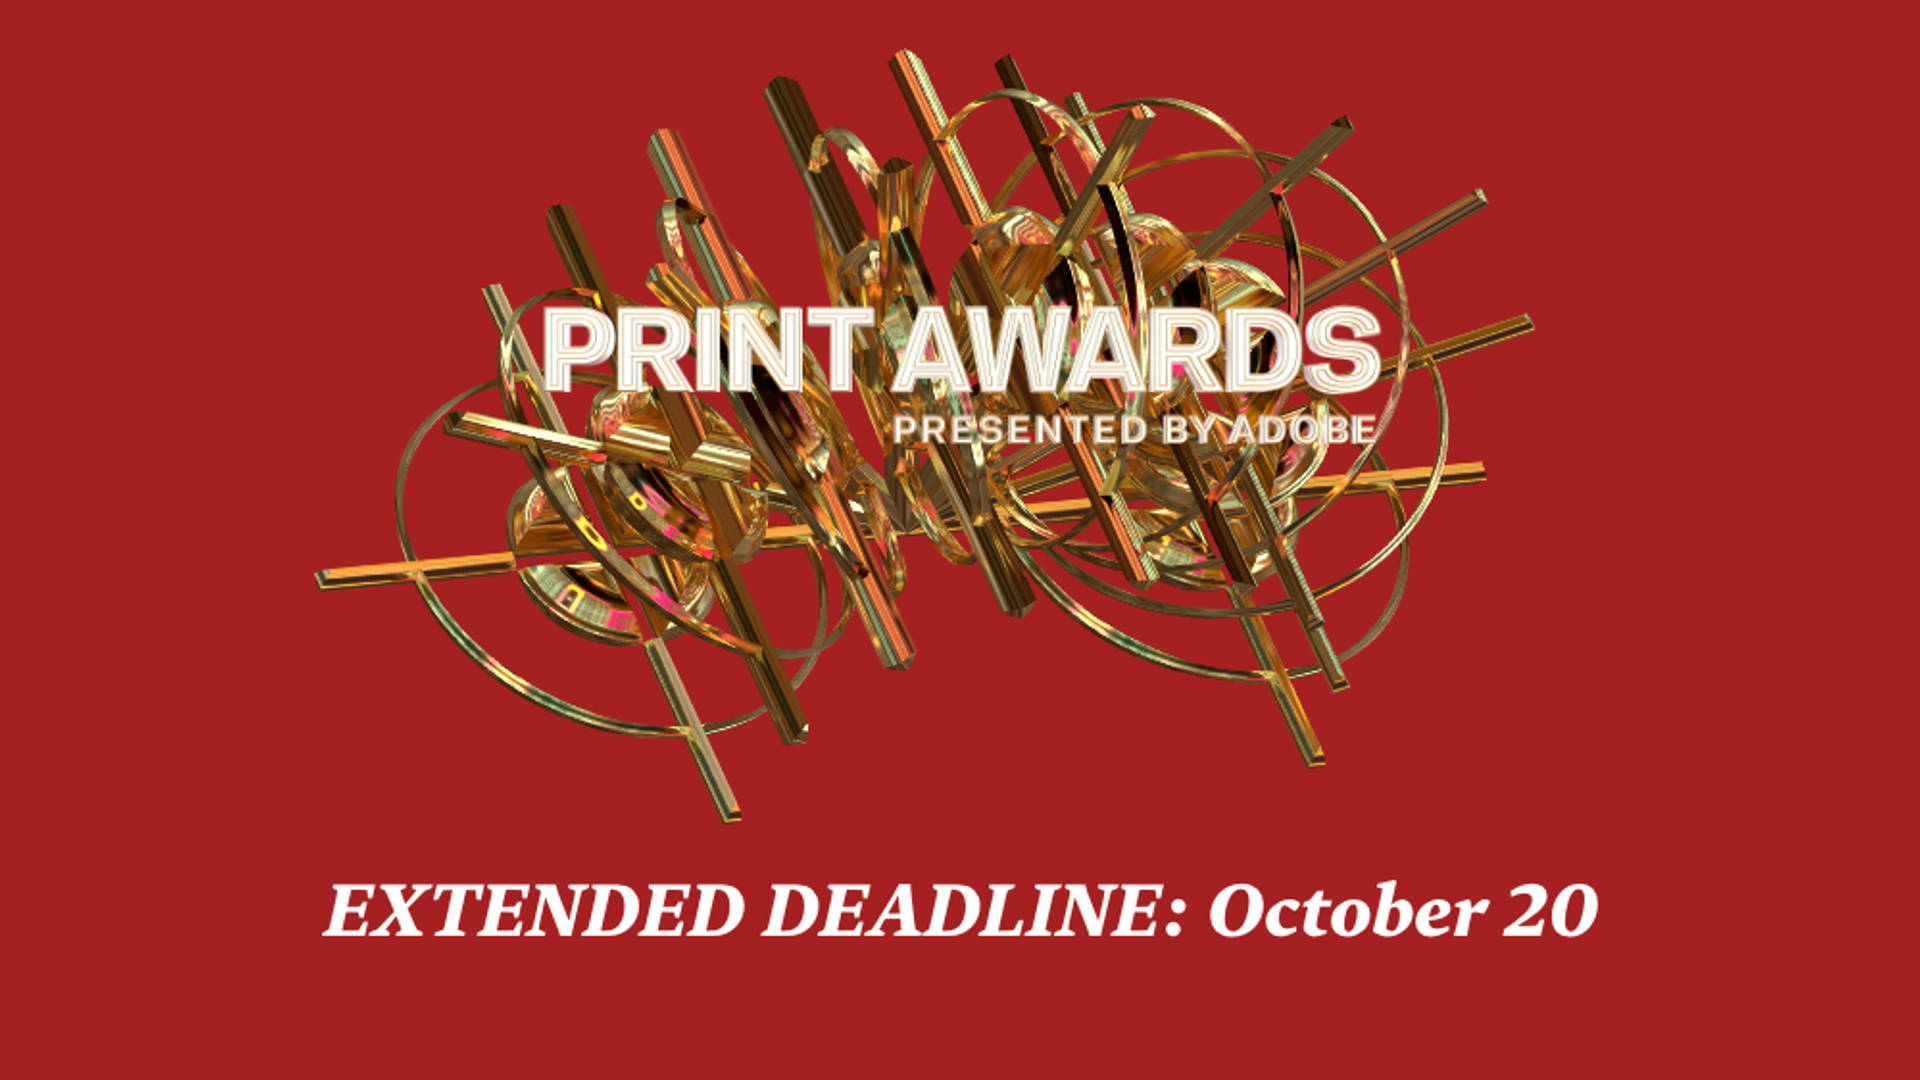 Featured image for PRINT Awards 2020 EXTENDED DEADLINE: October 20